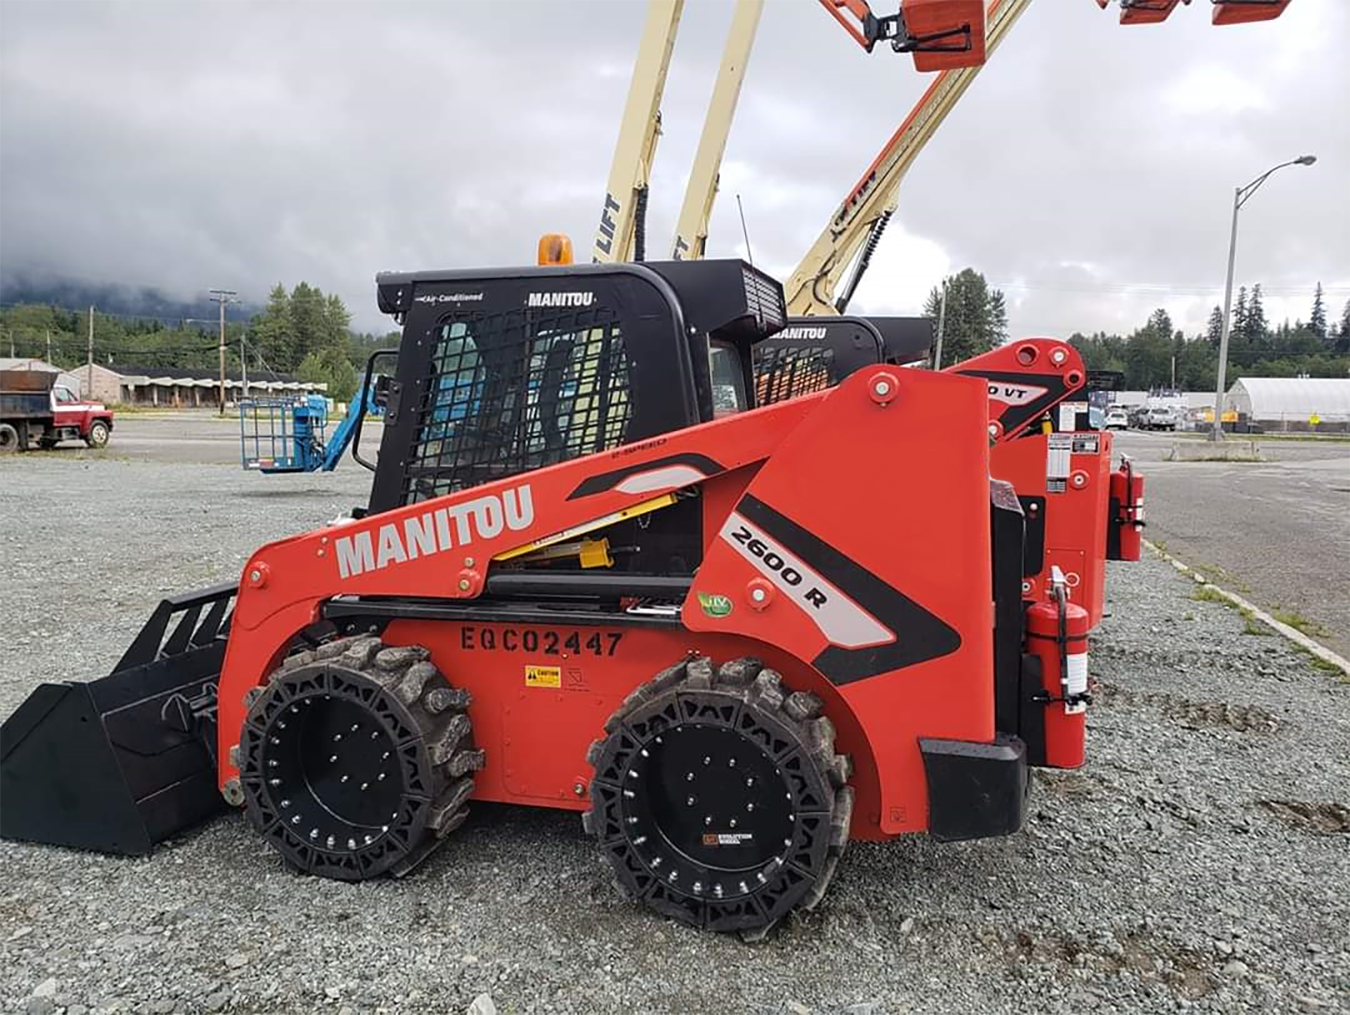 This image is about a Red Manitou Skid Steer using our traction skid steer tires